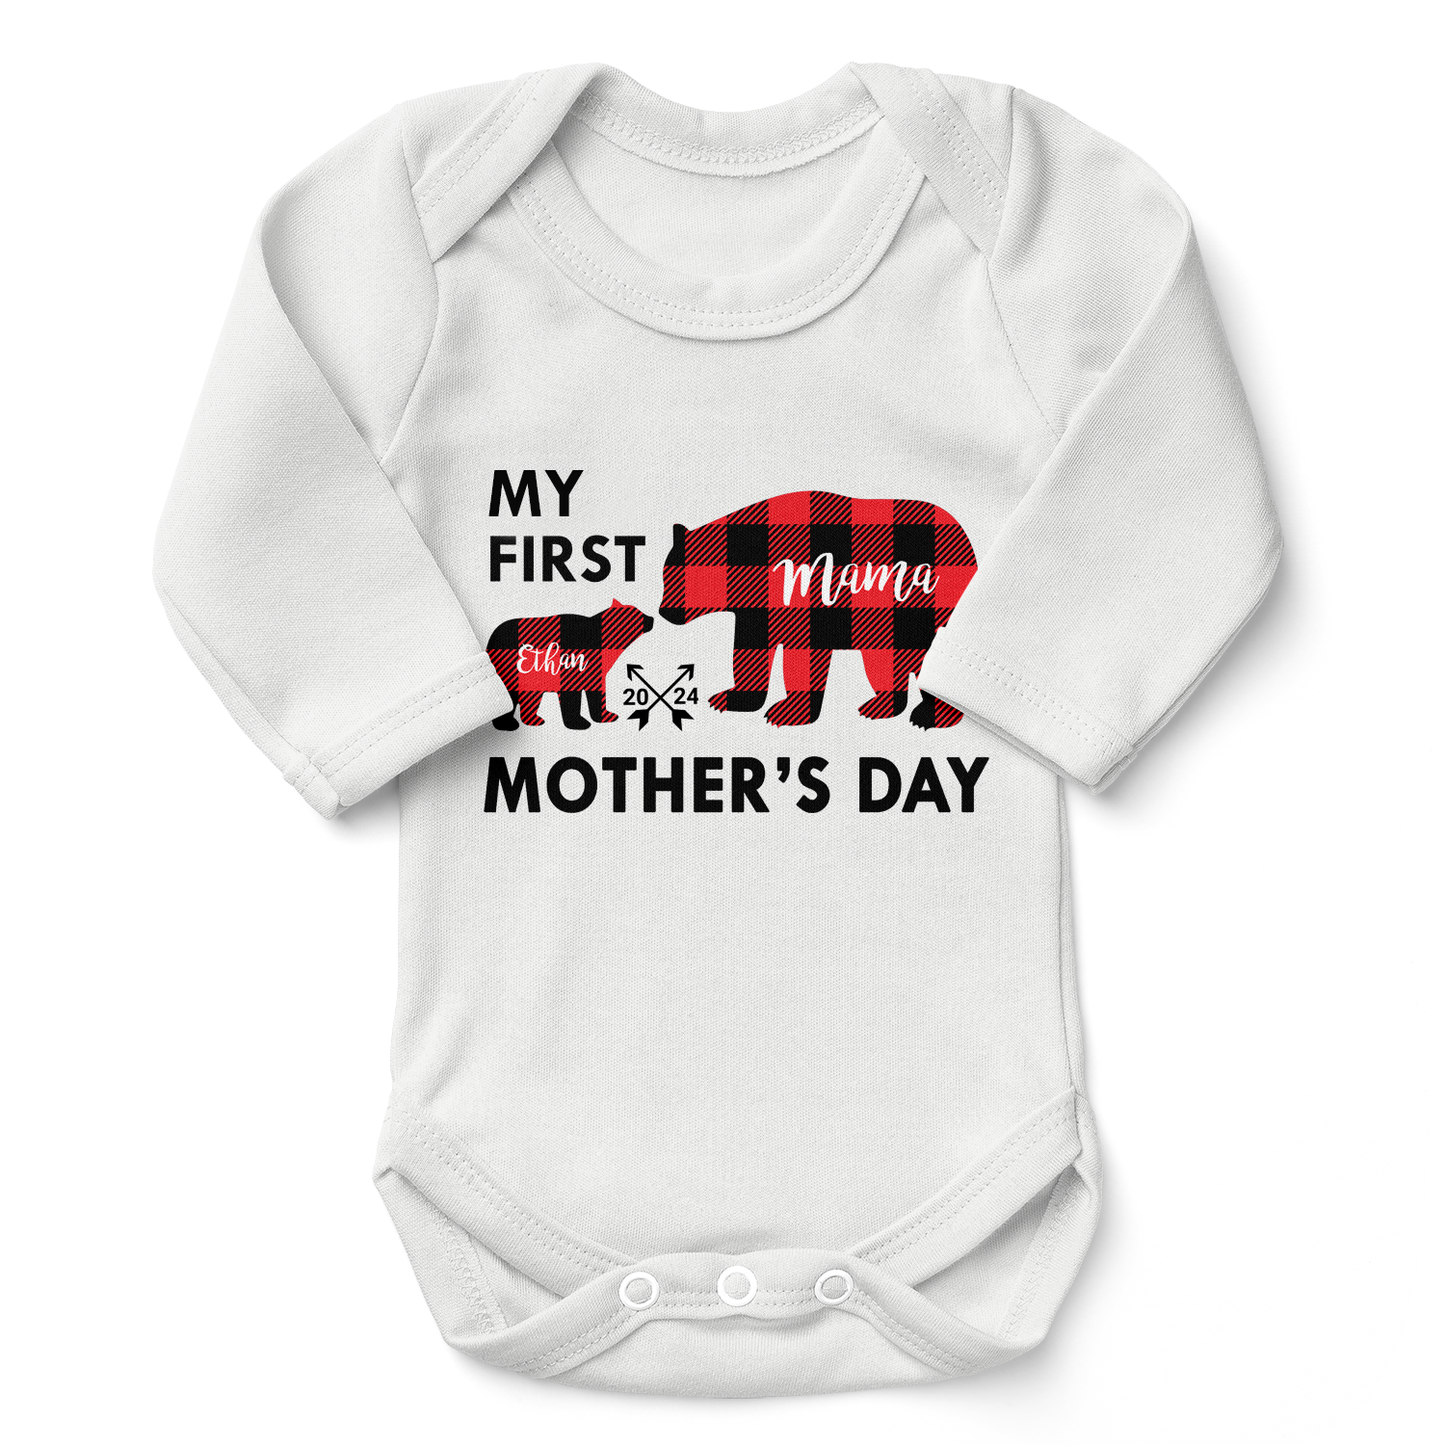 [Personalized] Endanzoo Organic Baby Bodysuit - My First Mother's Day 2024